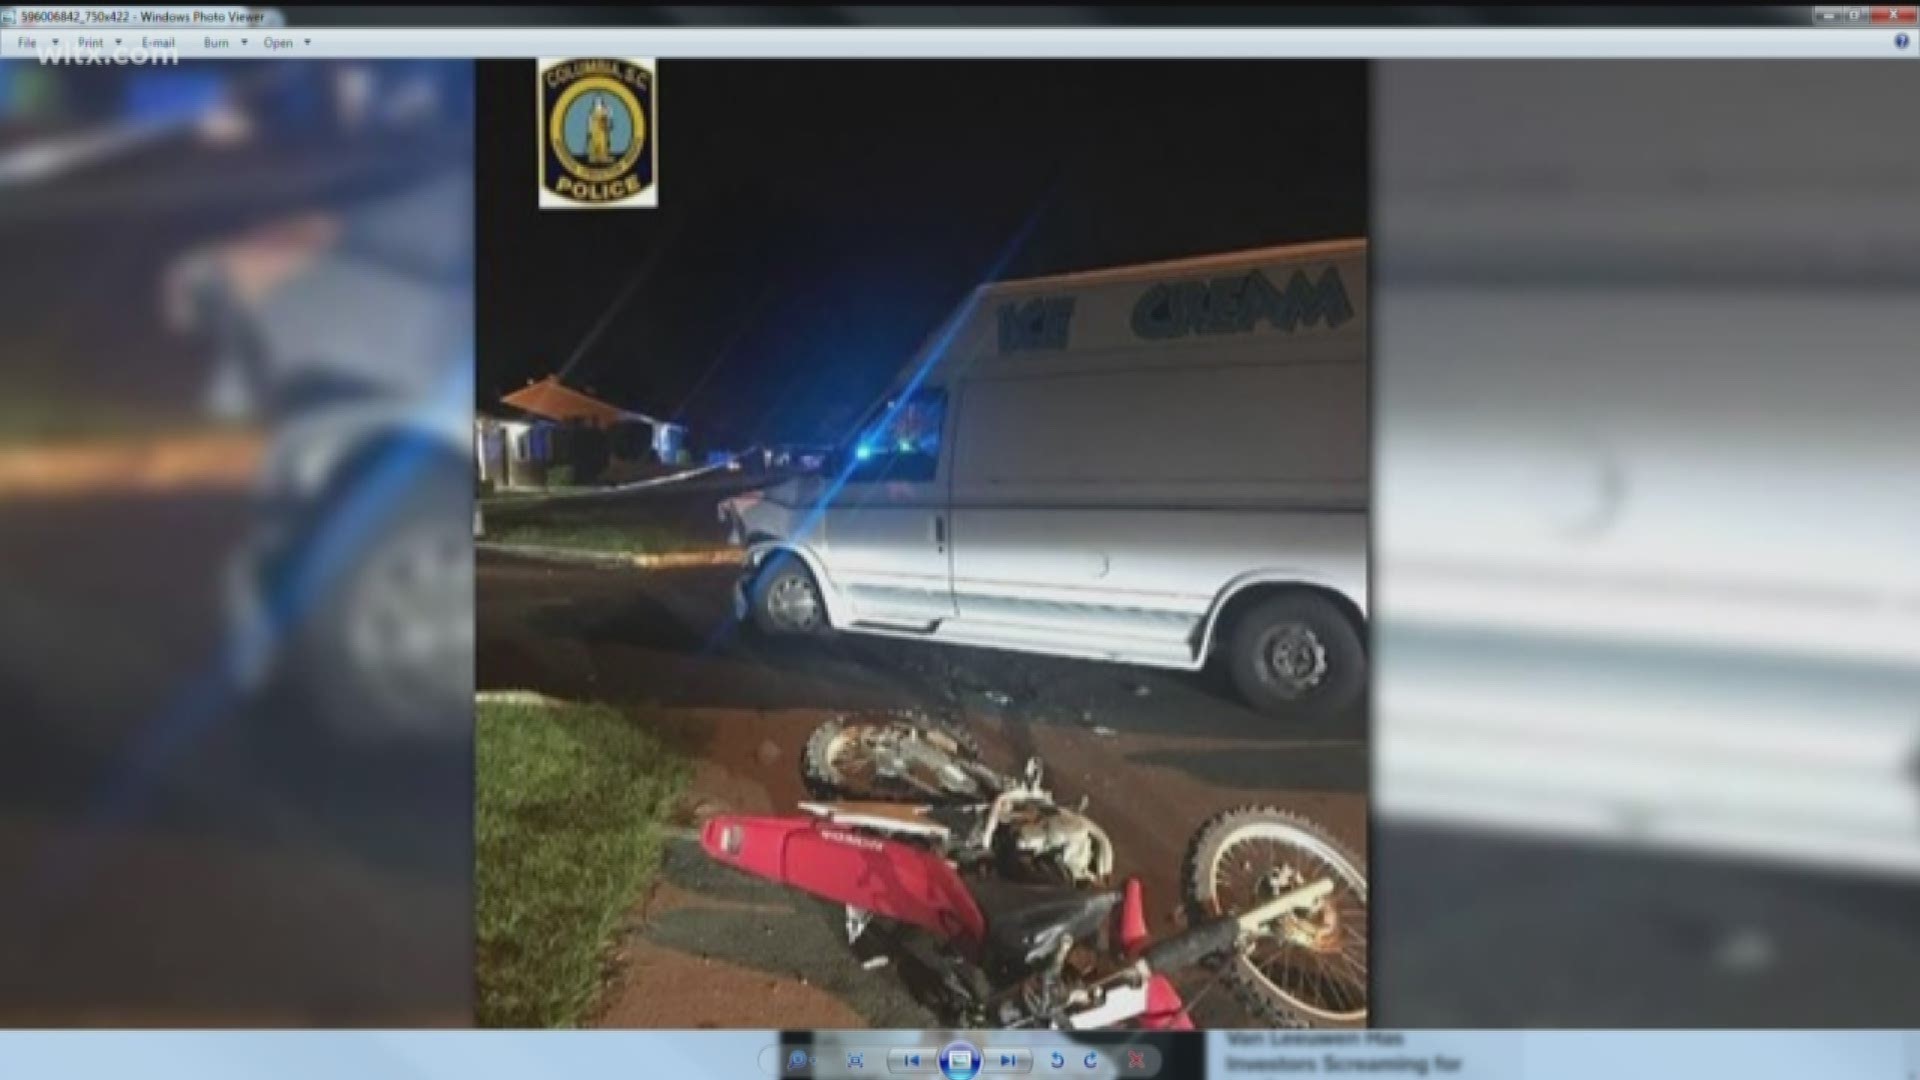 The driver of the dirt bike was reportedly speeding without headlights when the crash occurred.